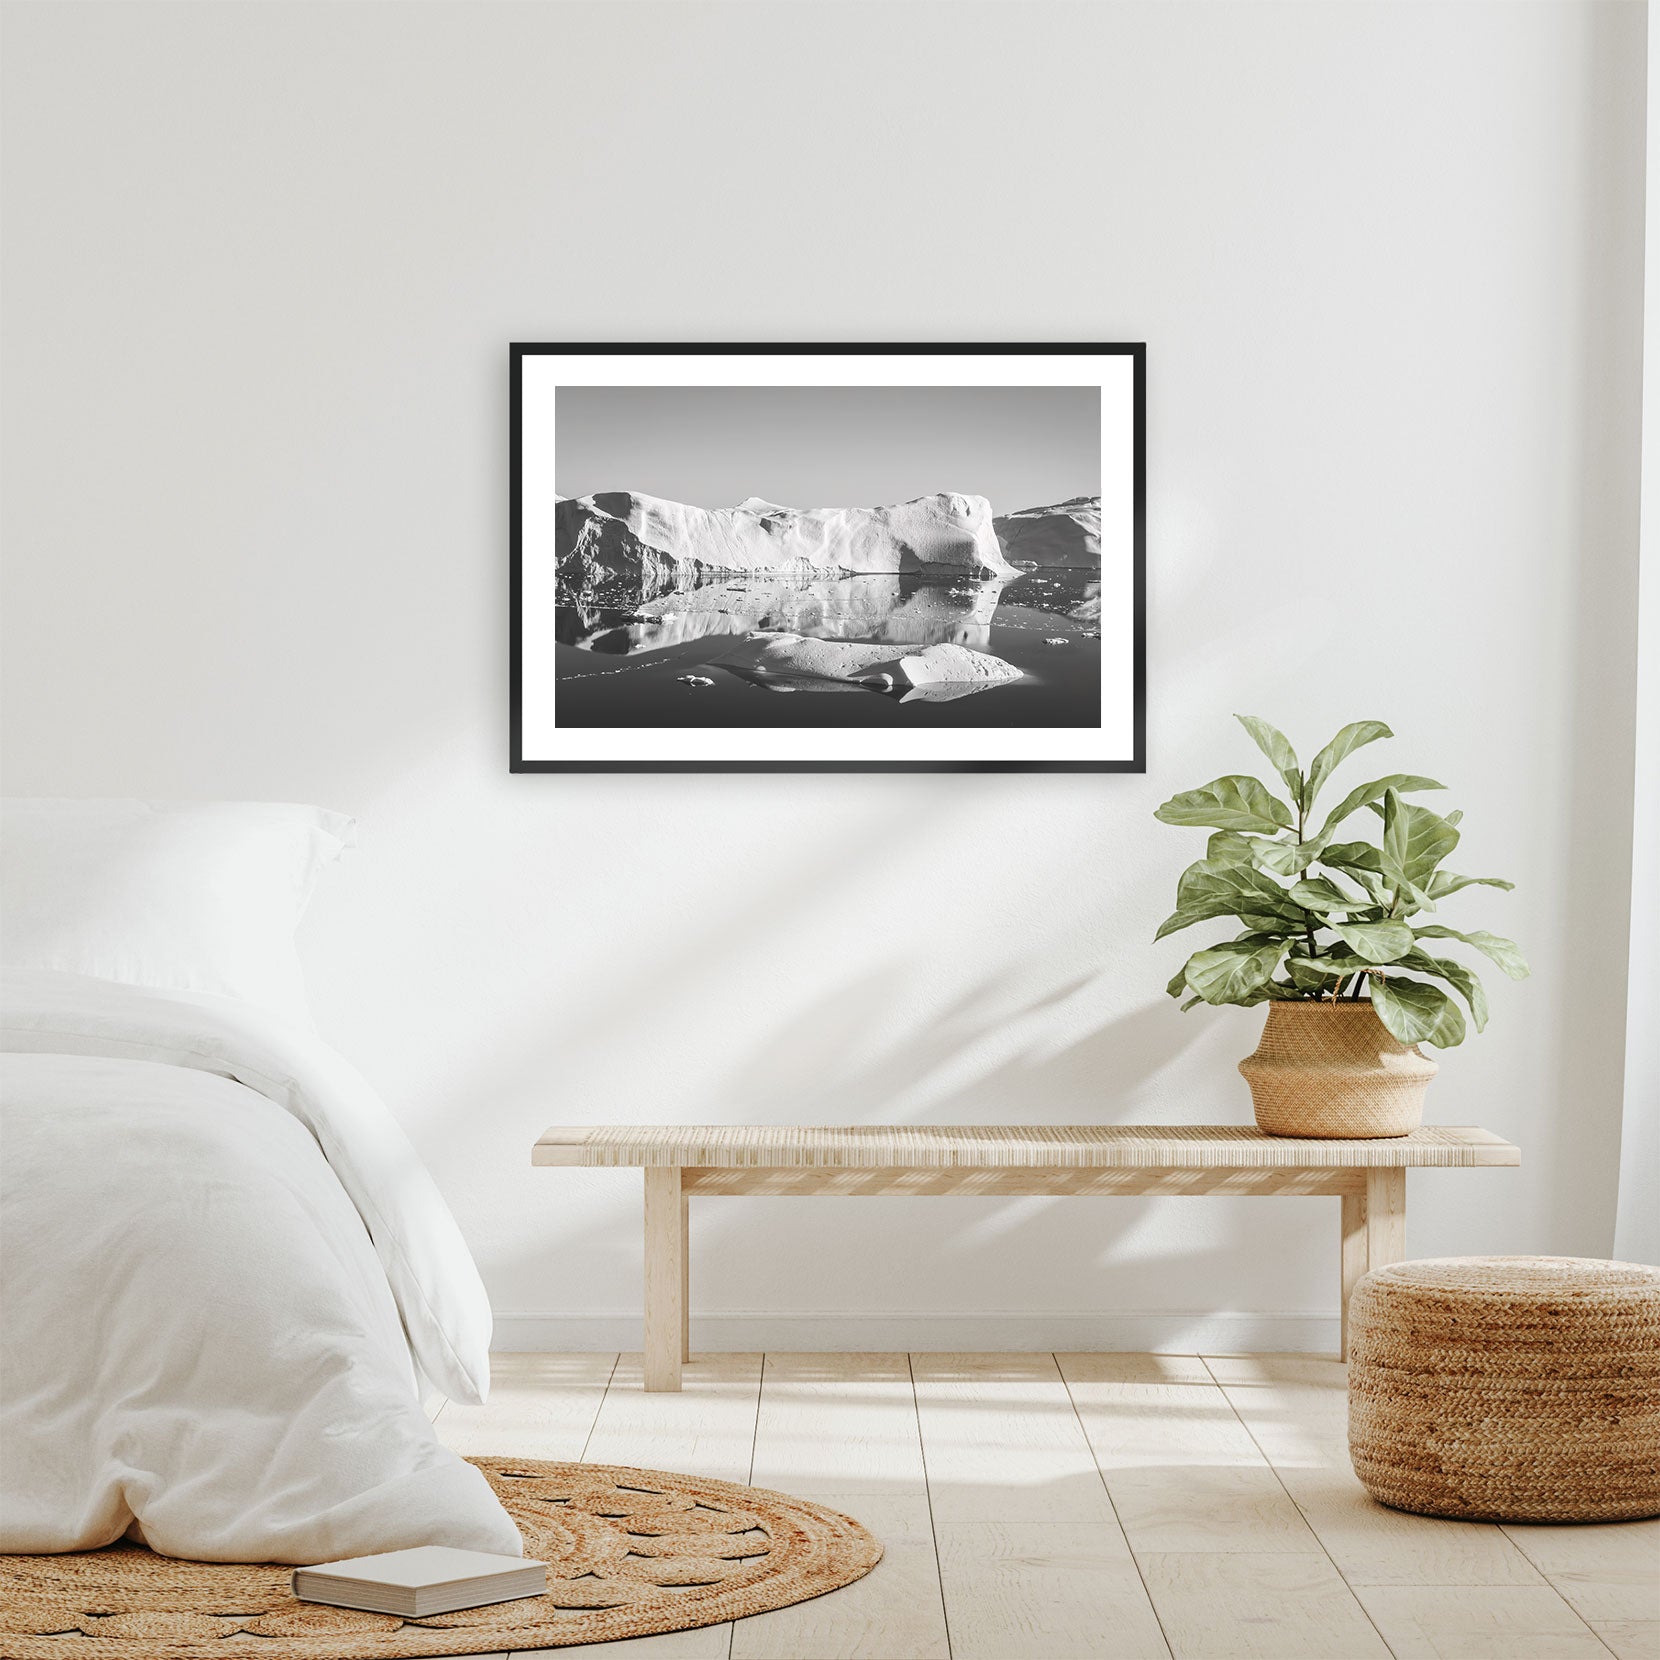 A framed black and white print of icebergs in Greenland